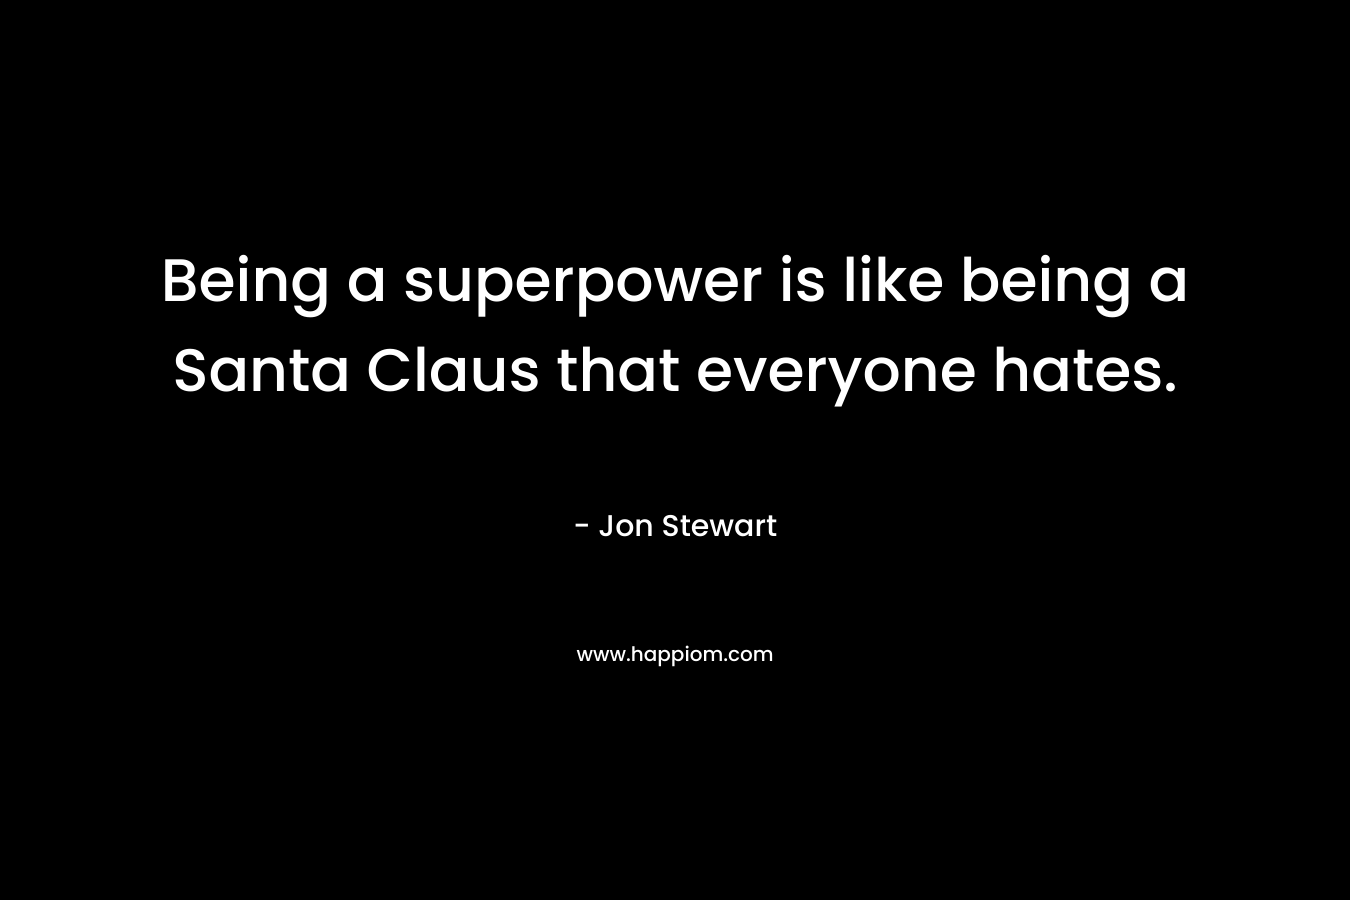 Being a superpower is like being a Santa Claus that everyone hates. – Jon Stewart